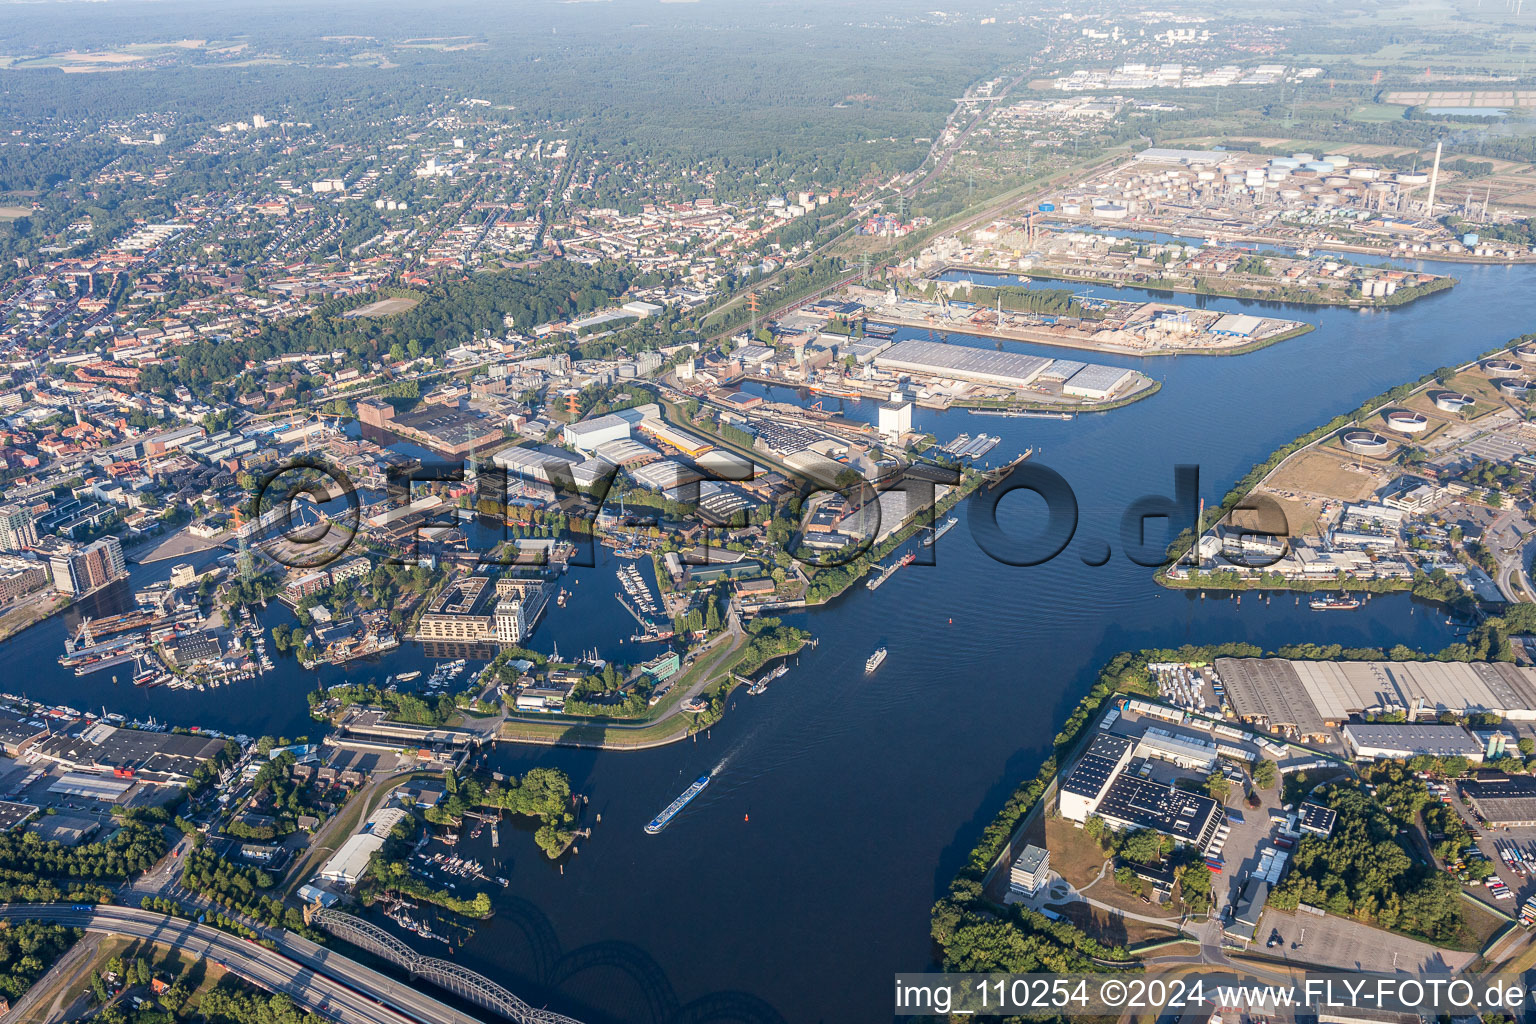 Quays and boat moorings at the port of the inland port Seehafen 1 to 4 on the southern Elbe in the district Harburg in Hamburg, Germany